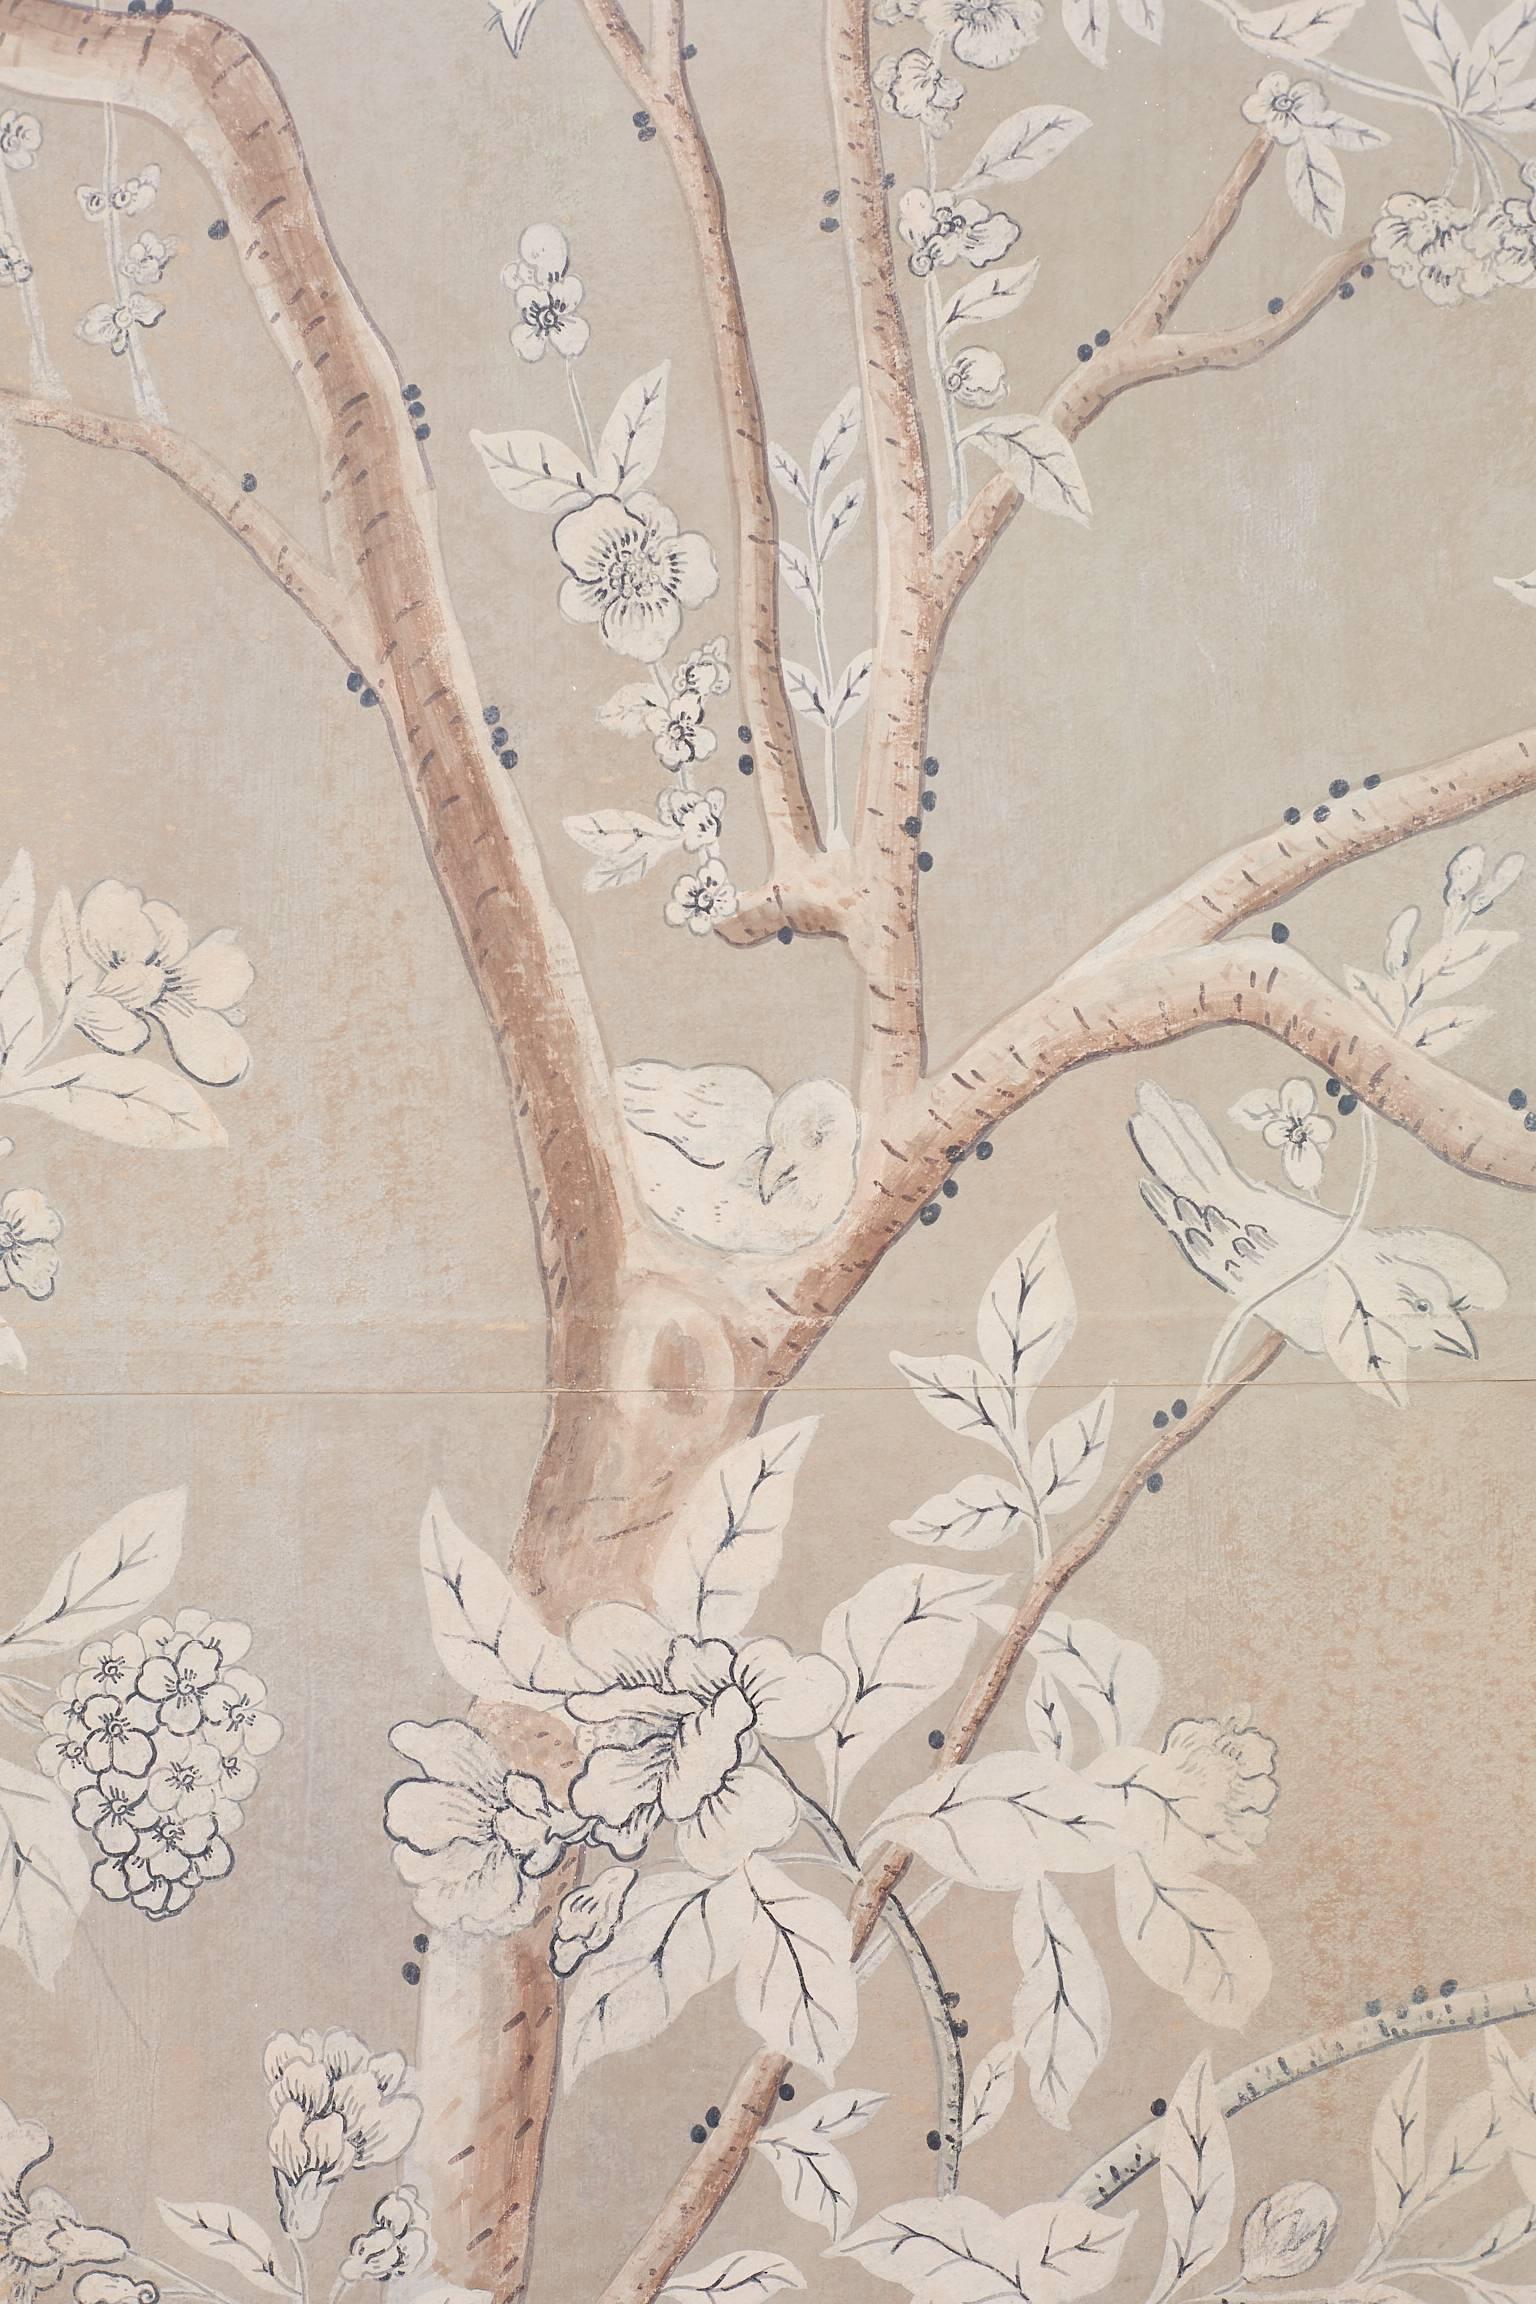 Faux Bamboo Monumental Chinoiserie Wallpaper Panels by Dennis and Leen